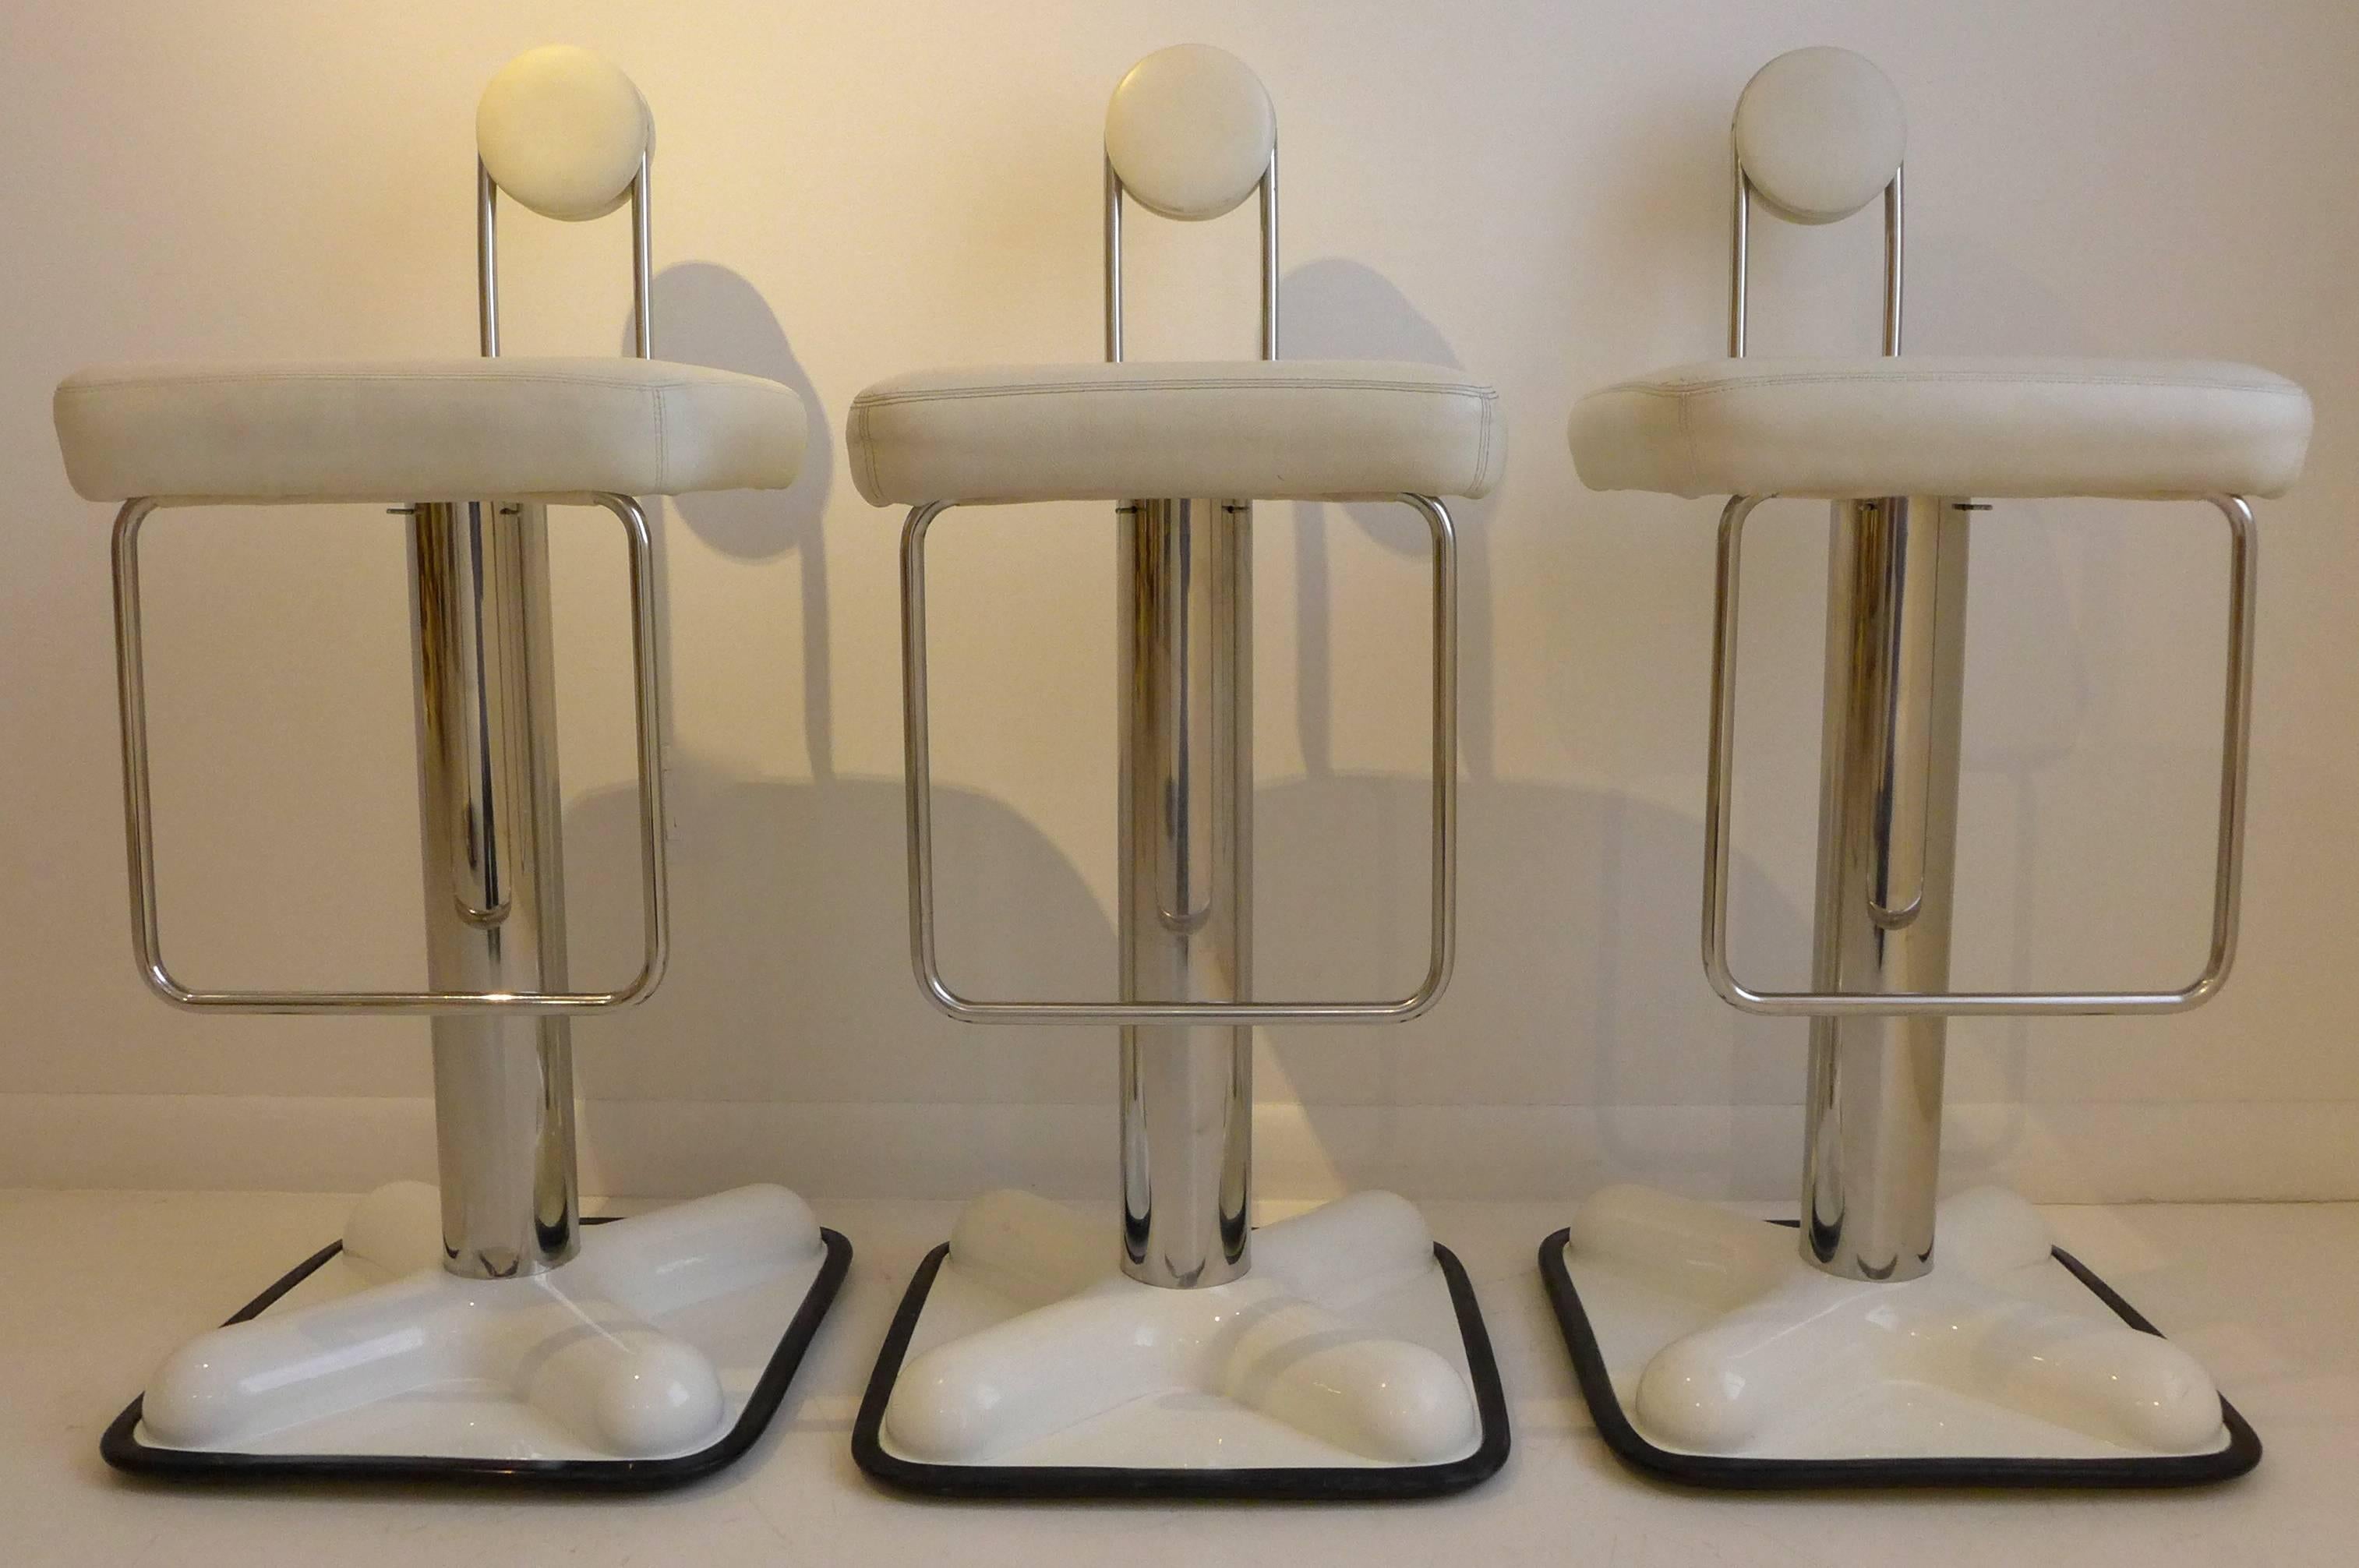 Set of three swivel bar stools, of chrome, leather and lacquered plastic, designed by Joe Colombo in 1971 and produced by Zanotta at a later date. In excellent condition, with only minor wear consistent with age and use. With Zanotta label and